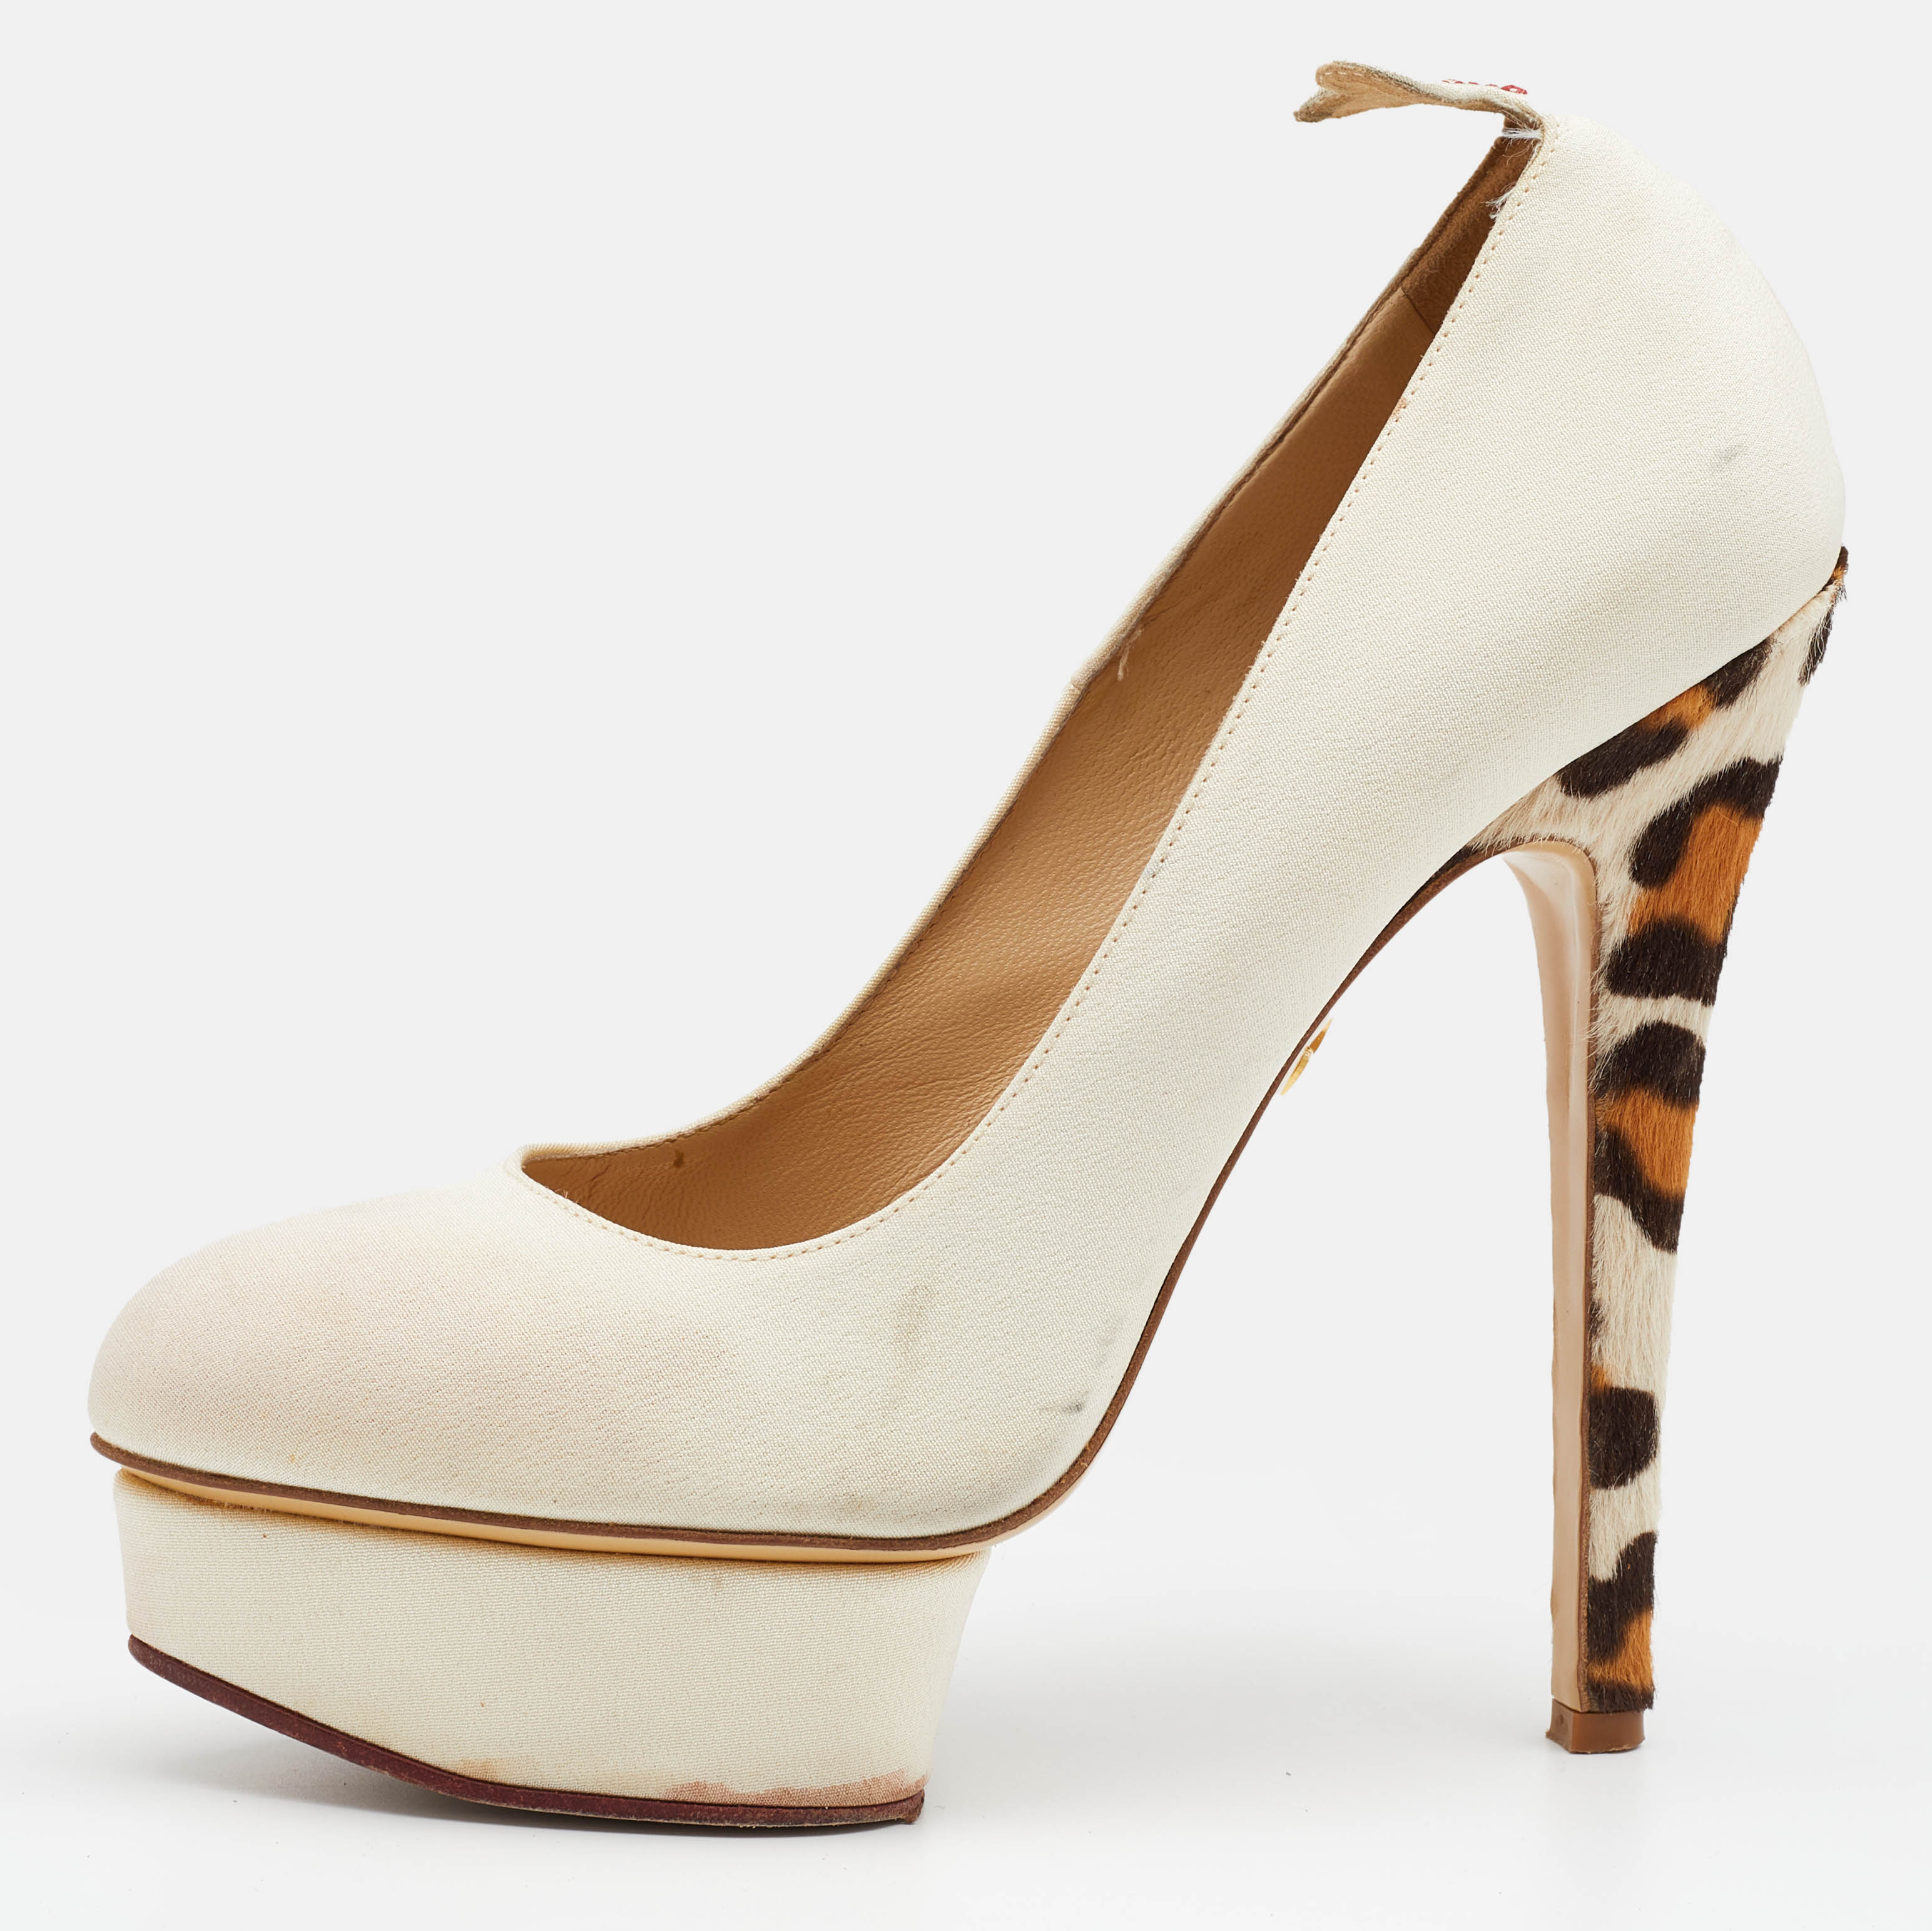 Charlotte Olympia Cream Fabric And Calf Hair Dolly Platform Pumps Size 40